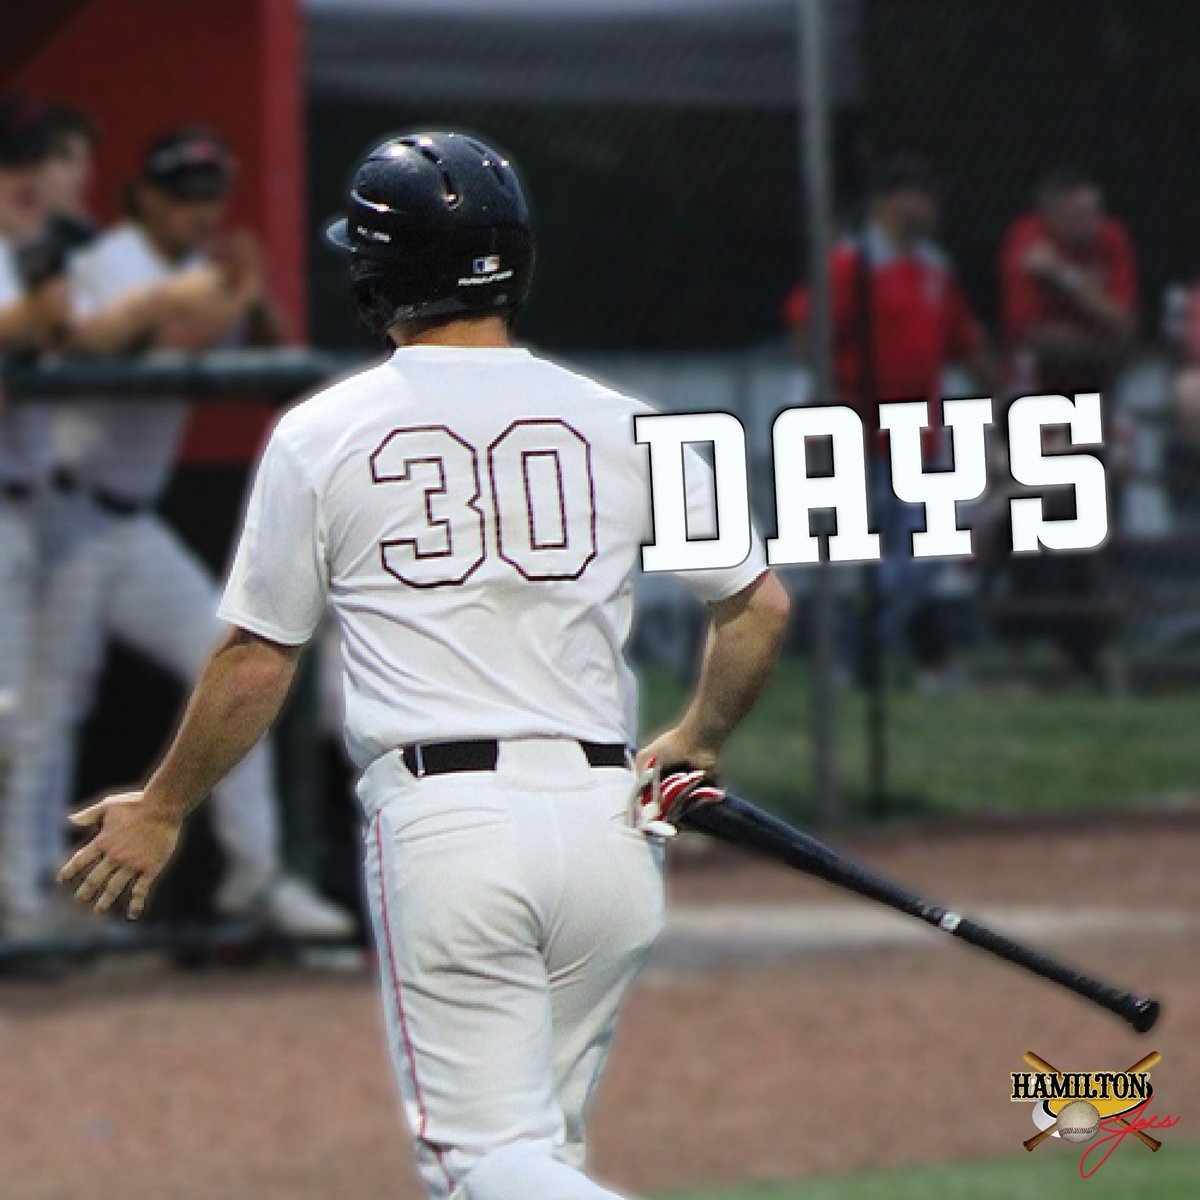 The countdown is on...only 30 days until Joes baseball is back!⚾
#GoJoes #NotYourAverageJoes